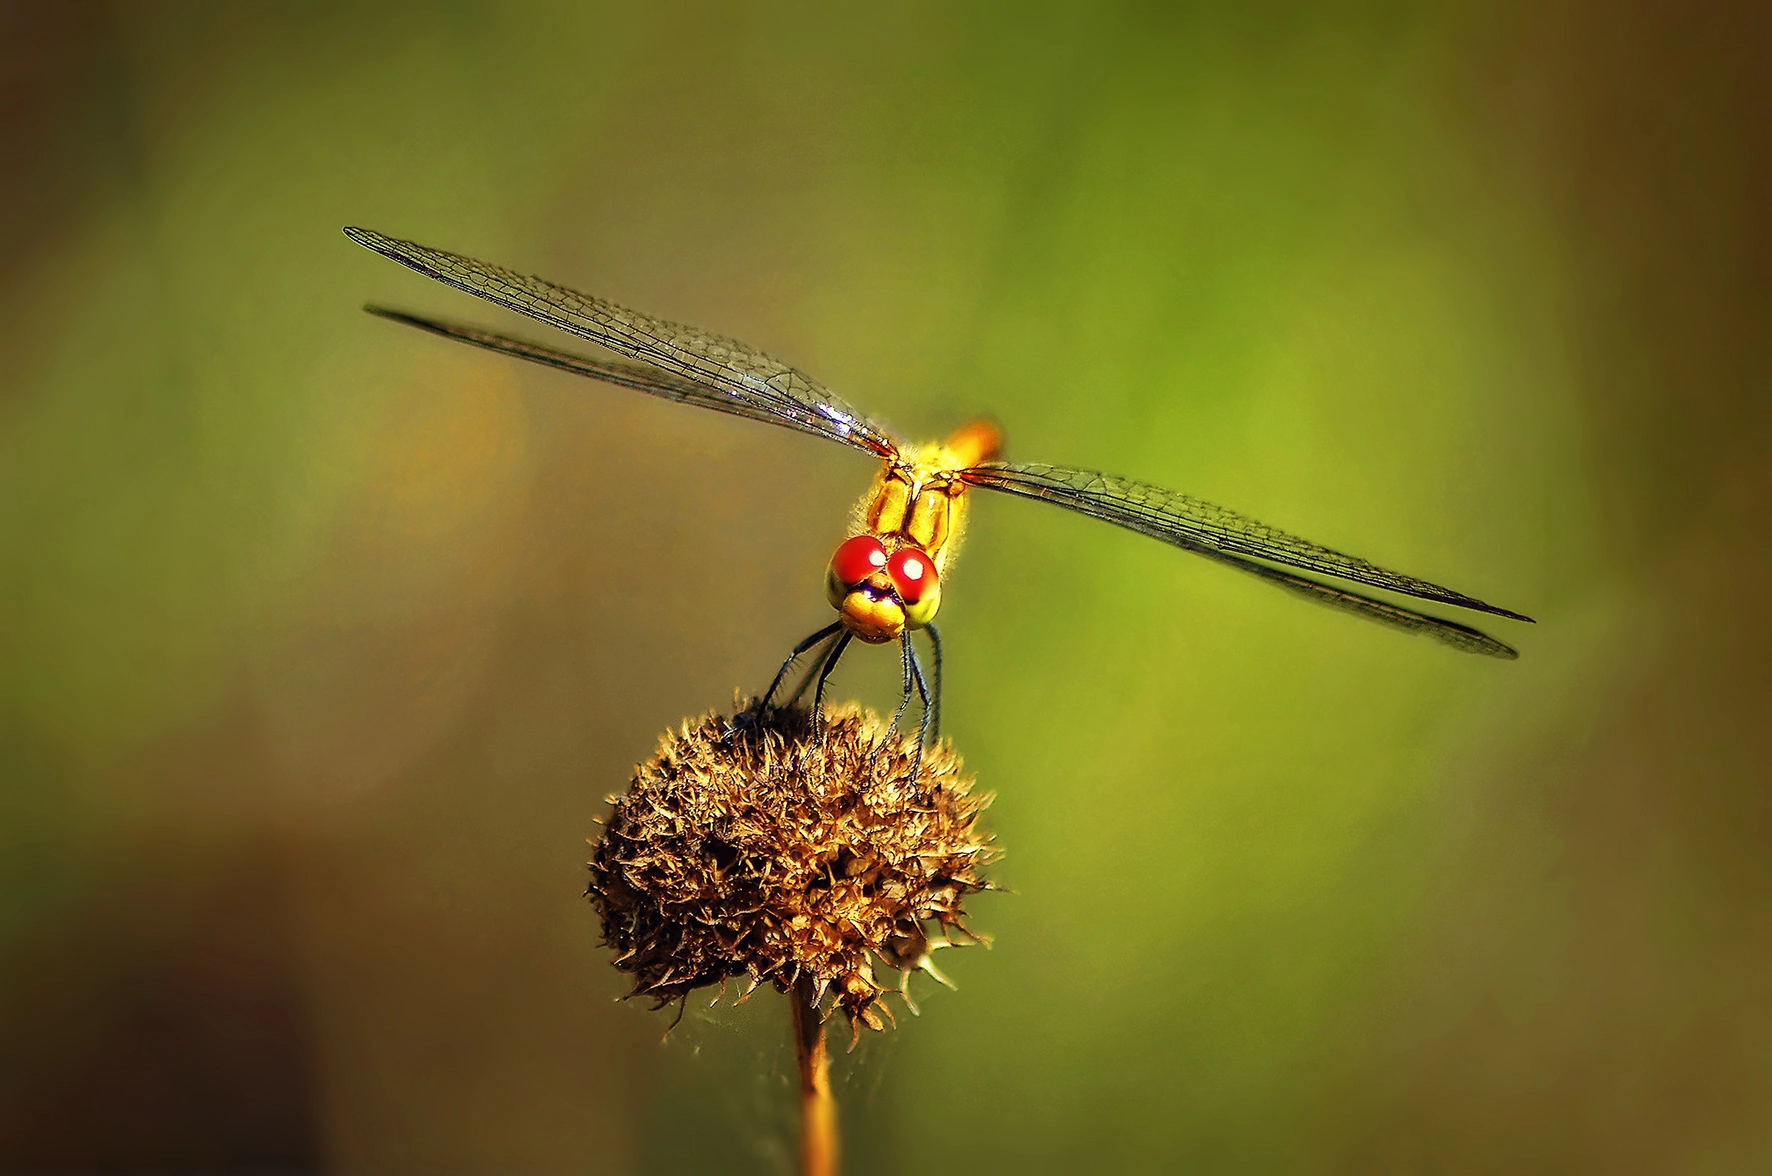 Pentax K-r sample photo. Dragonfly photography